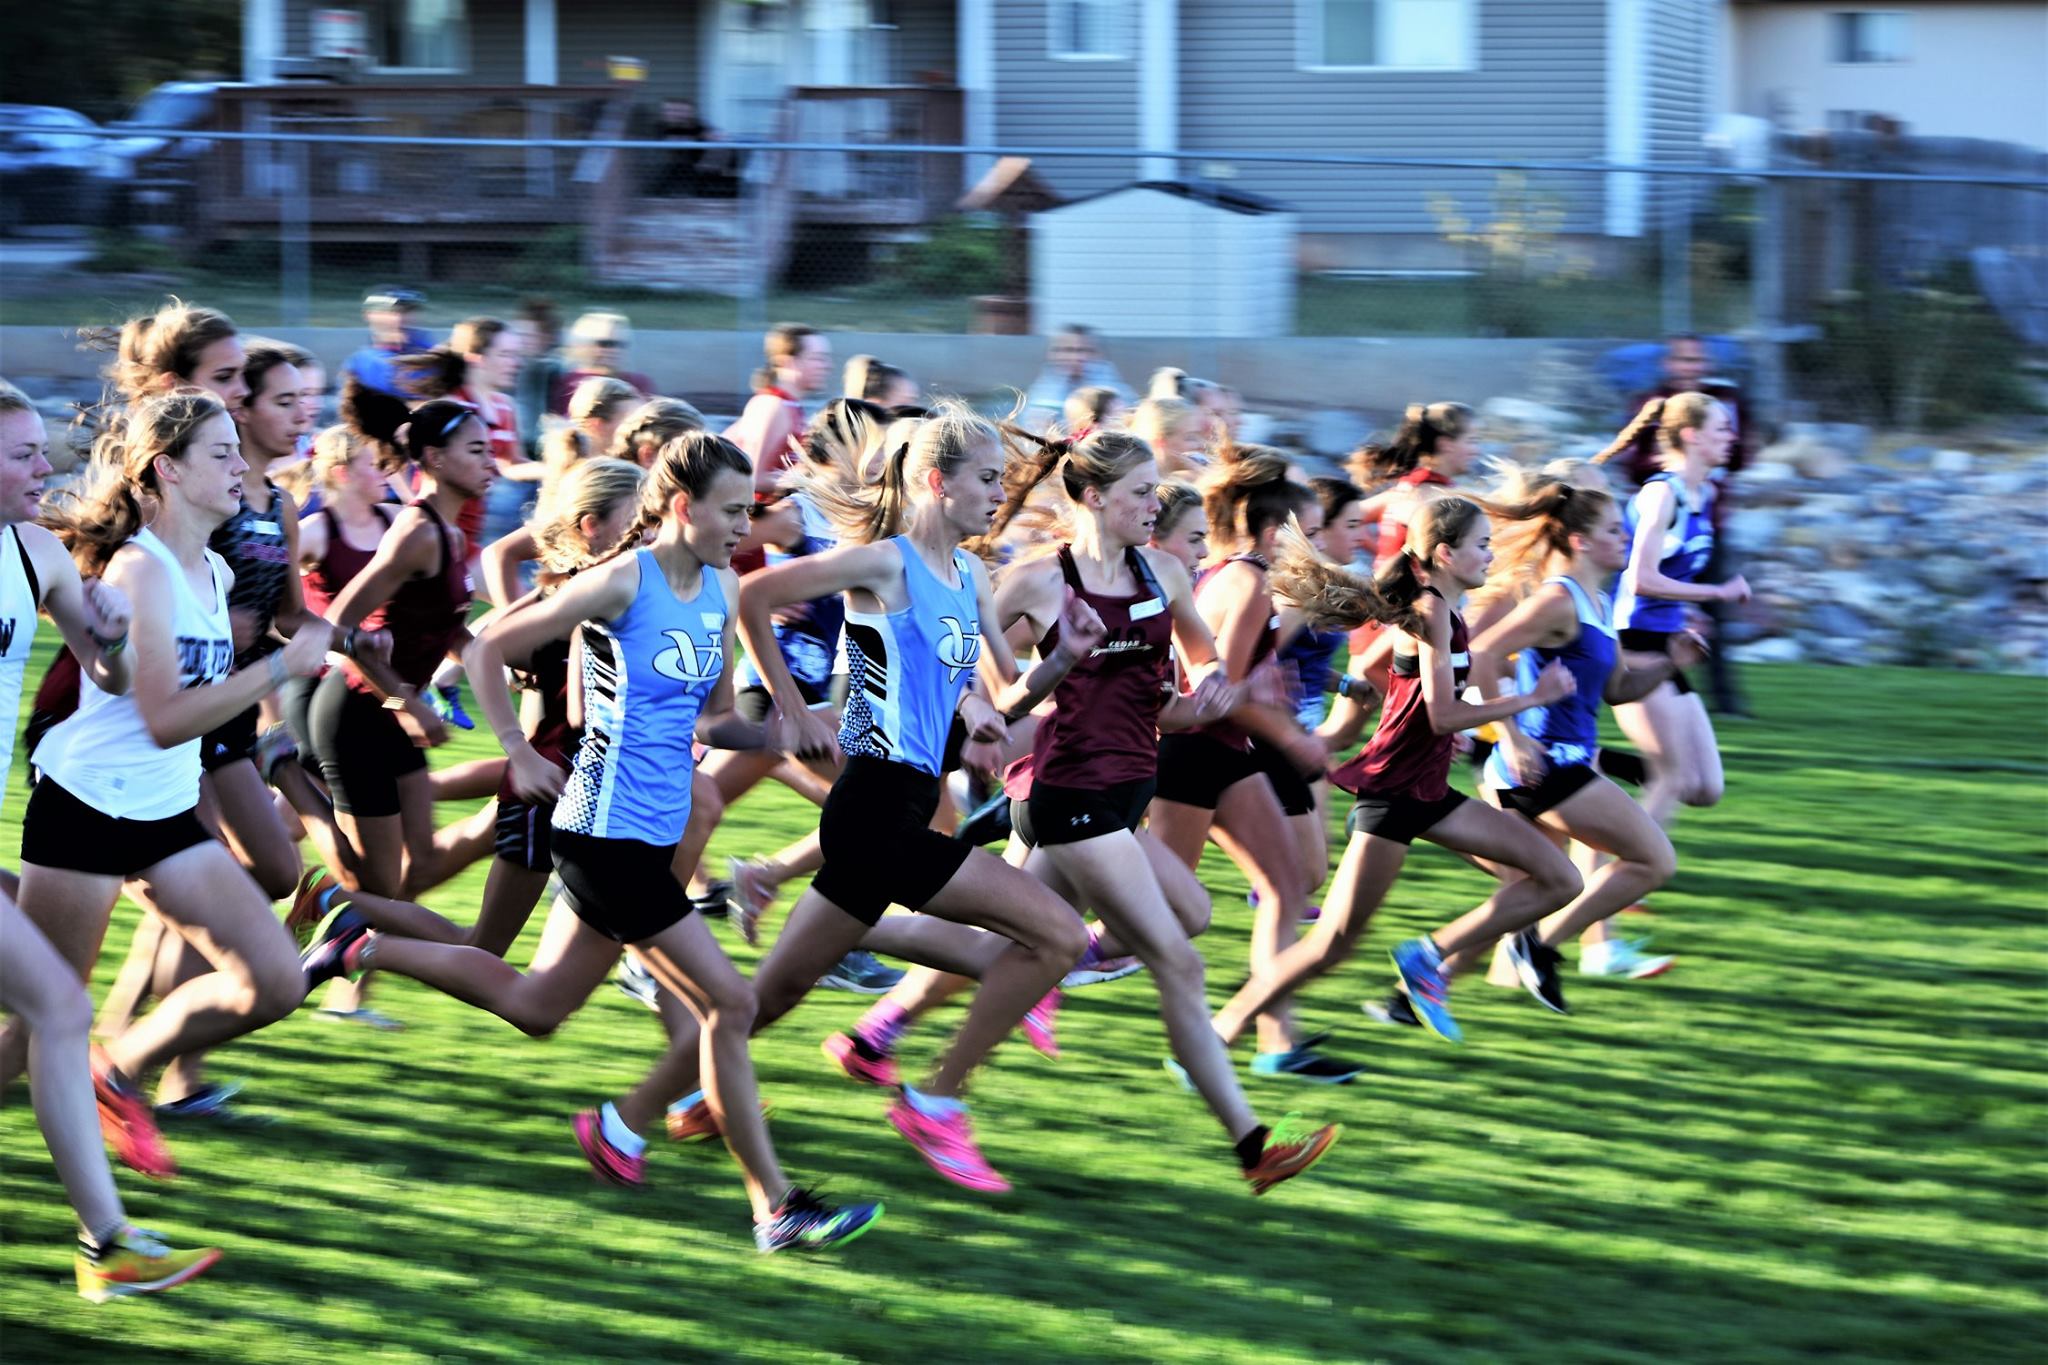 Cross Country team in competition